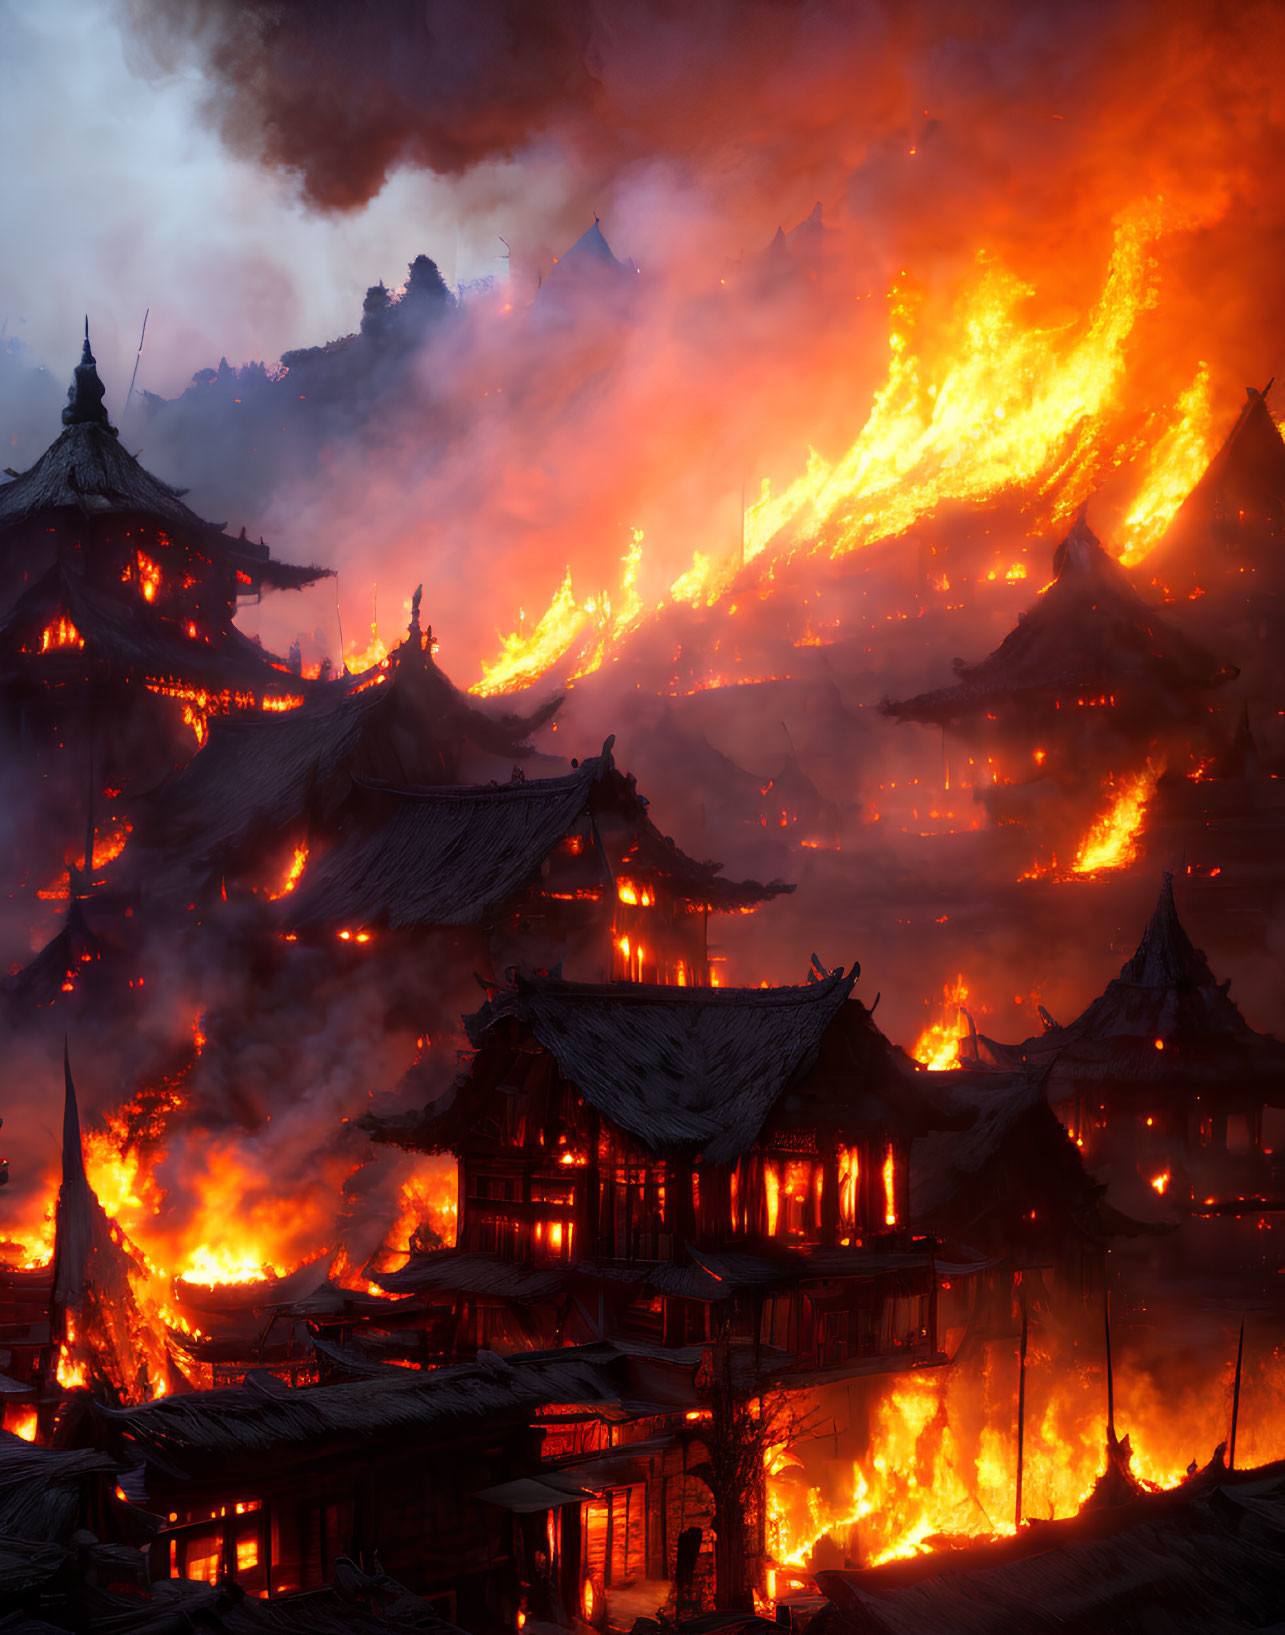 Ancient Asian-style village engulfed in fiery inferno